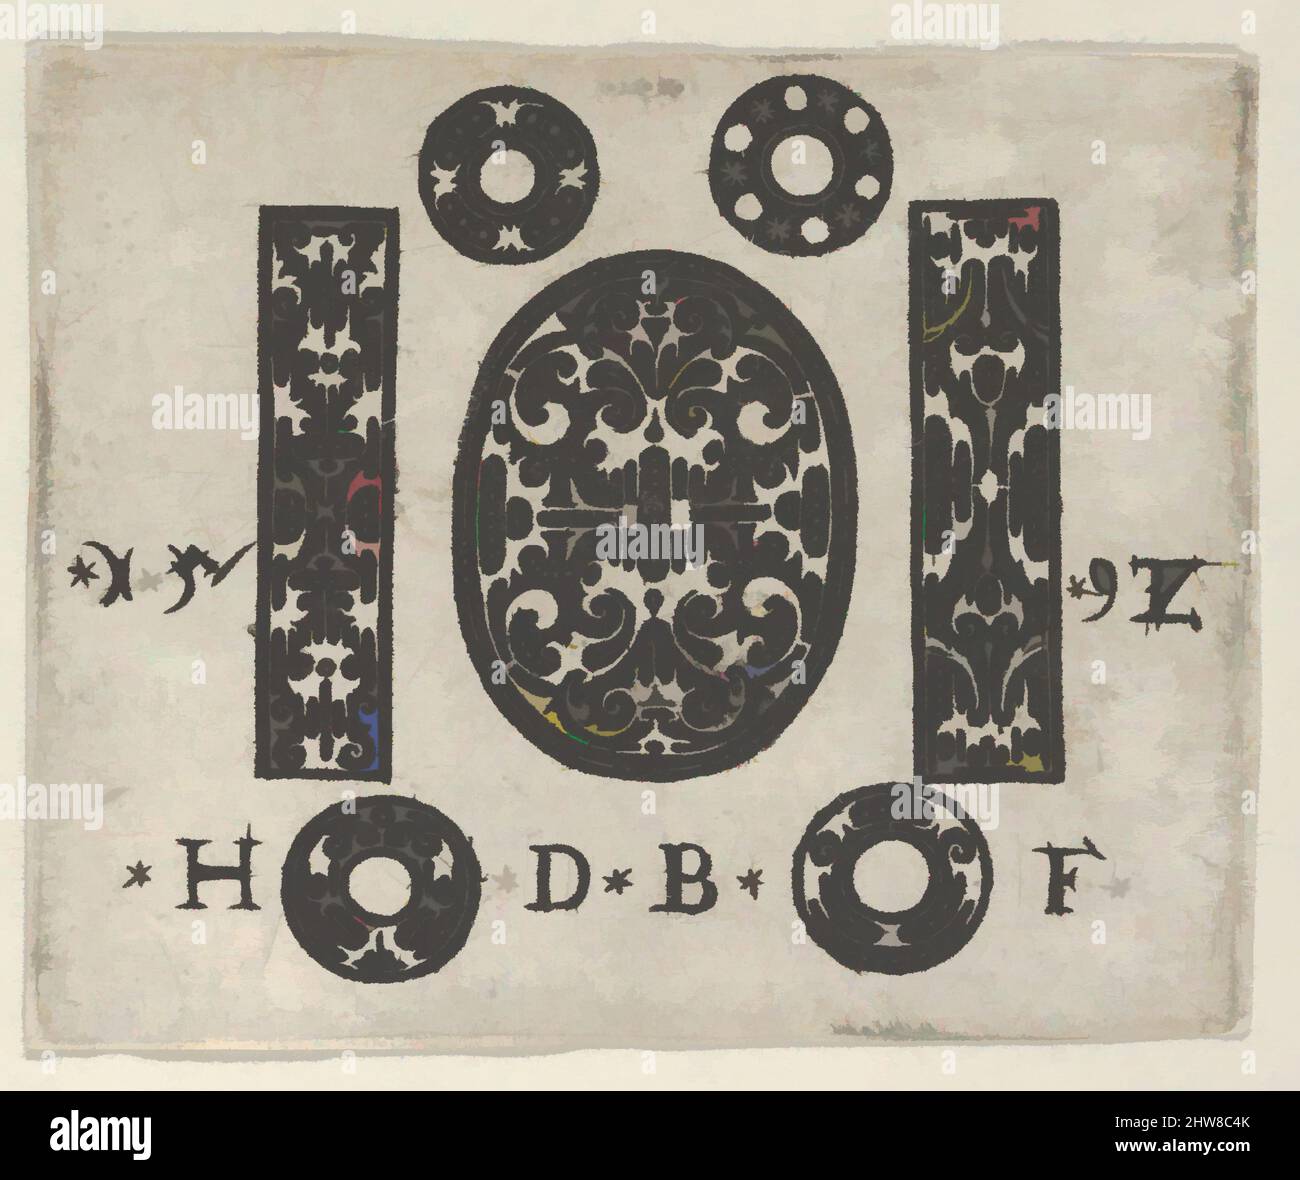 Art inspired by Blackwork Print with Two Vertical Panels Flanking an Oval at Center with Four Small Circles, 1592, Blackwork engraving, Sheet: 1 13/16 × 2 5/16 in. (4.6 × 5.8 cm), Hans de Bull (German, active 1592–1604), Small blackwork print with an oval at center with symmetrical, Classic works modernized by Artotop with a splash of modernity. Shapes, color and value, eye-catching visual impact on art. Emotions through freedom of artworks in a contemporary way. A timeless message pursuing a wildly creative new direction. Artists turning to the digital medium and creating the Artotop NFT Stock Photo